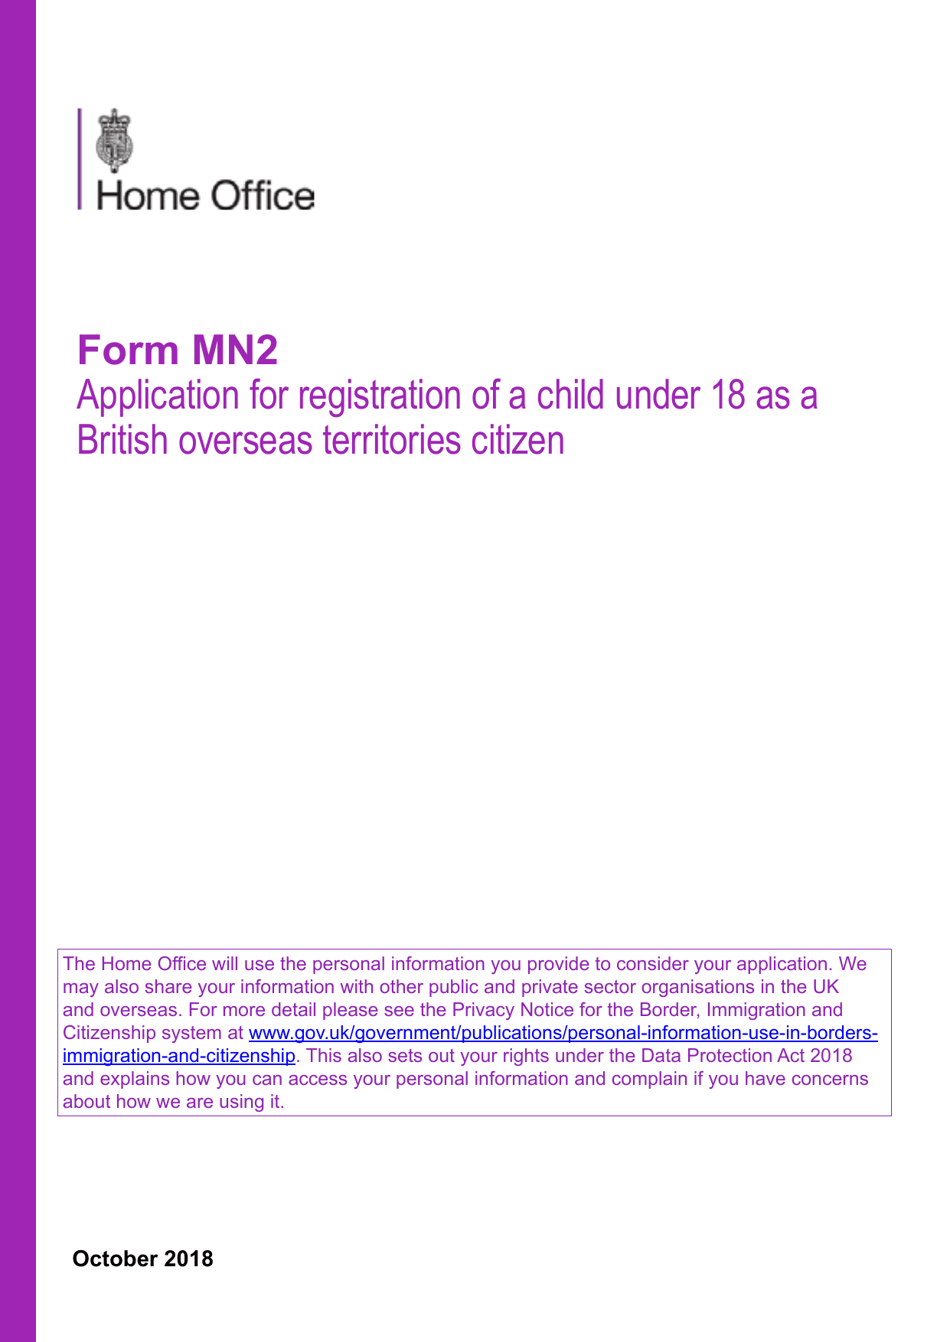 Form MN2 Application for Registration of a Child Under 18 as a British Overseas Territories Citizen - United Kingdom, Page 1